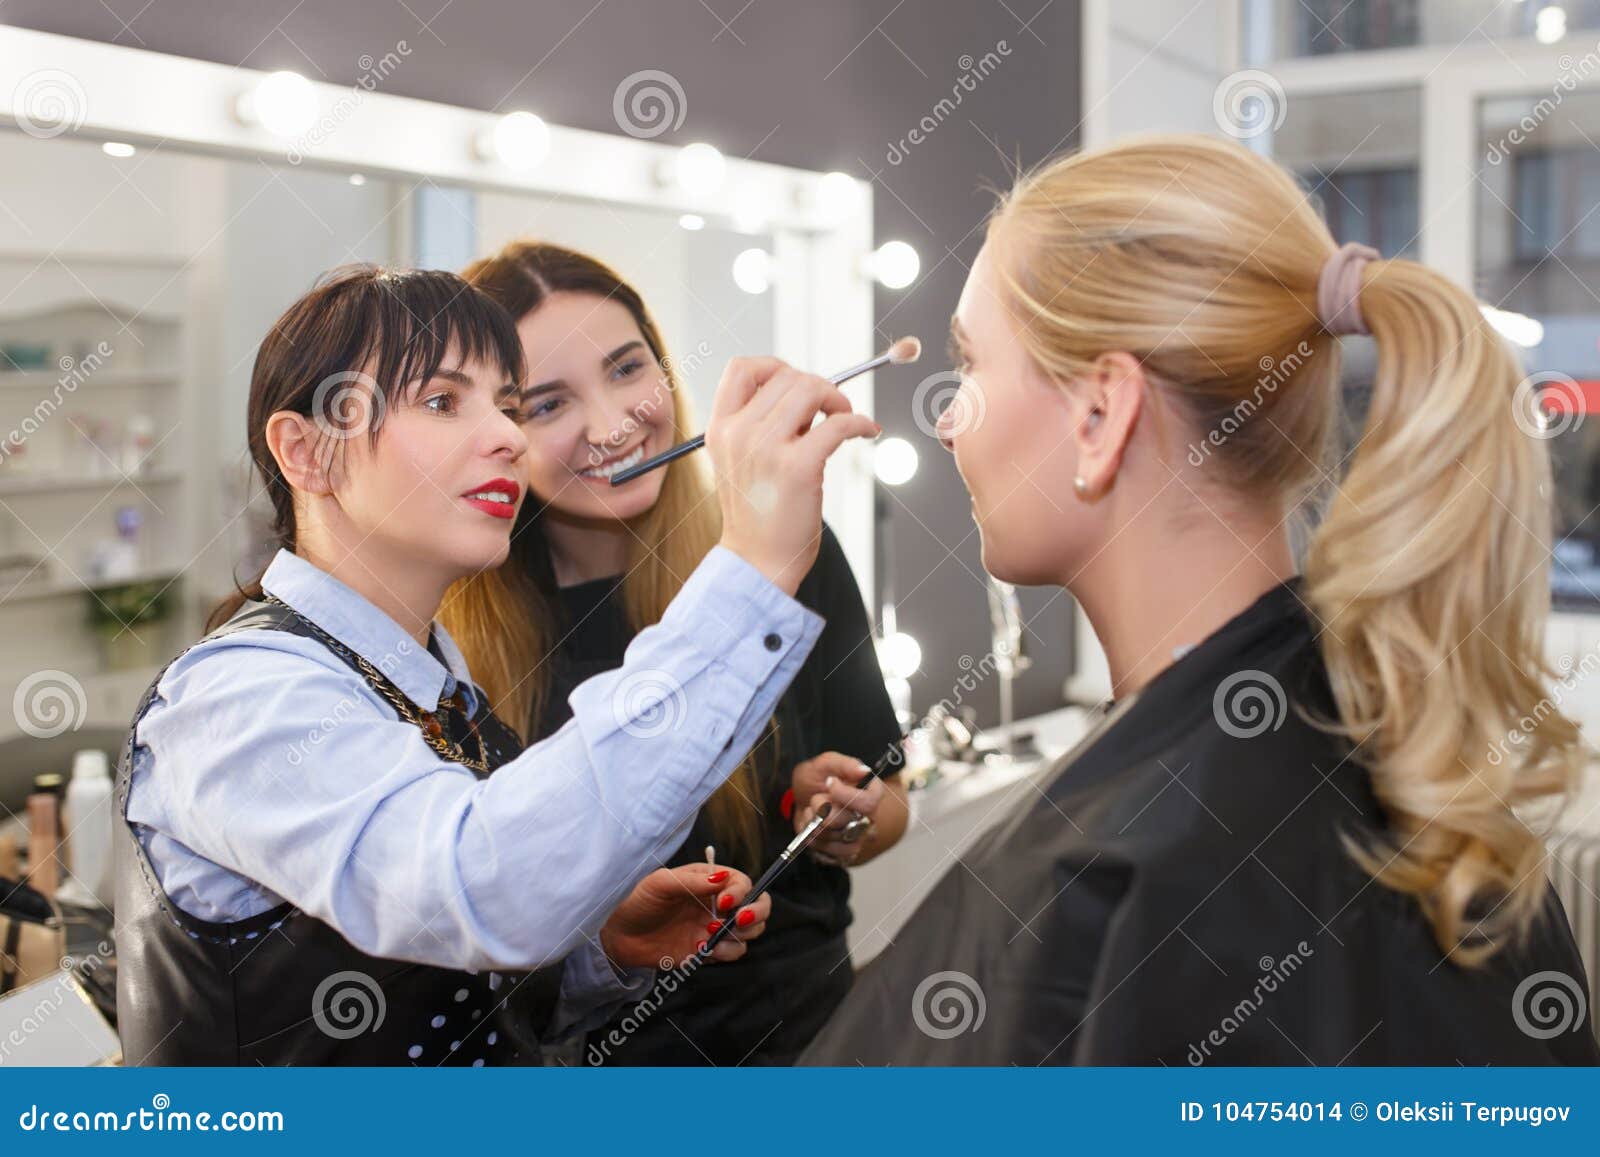 makeup tutorial lesson at beauty school